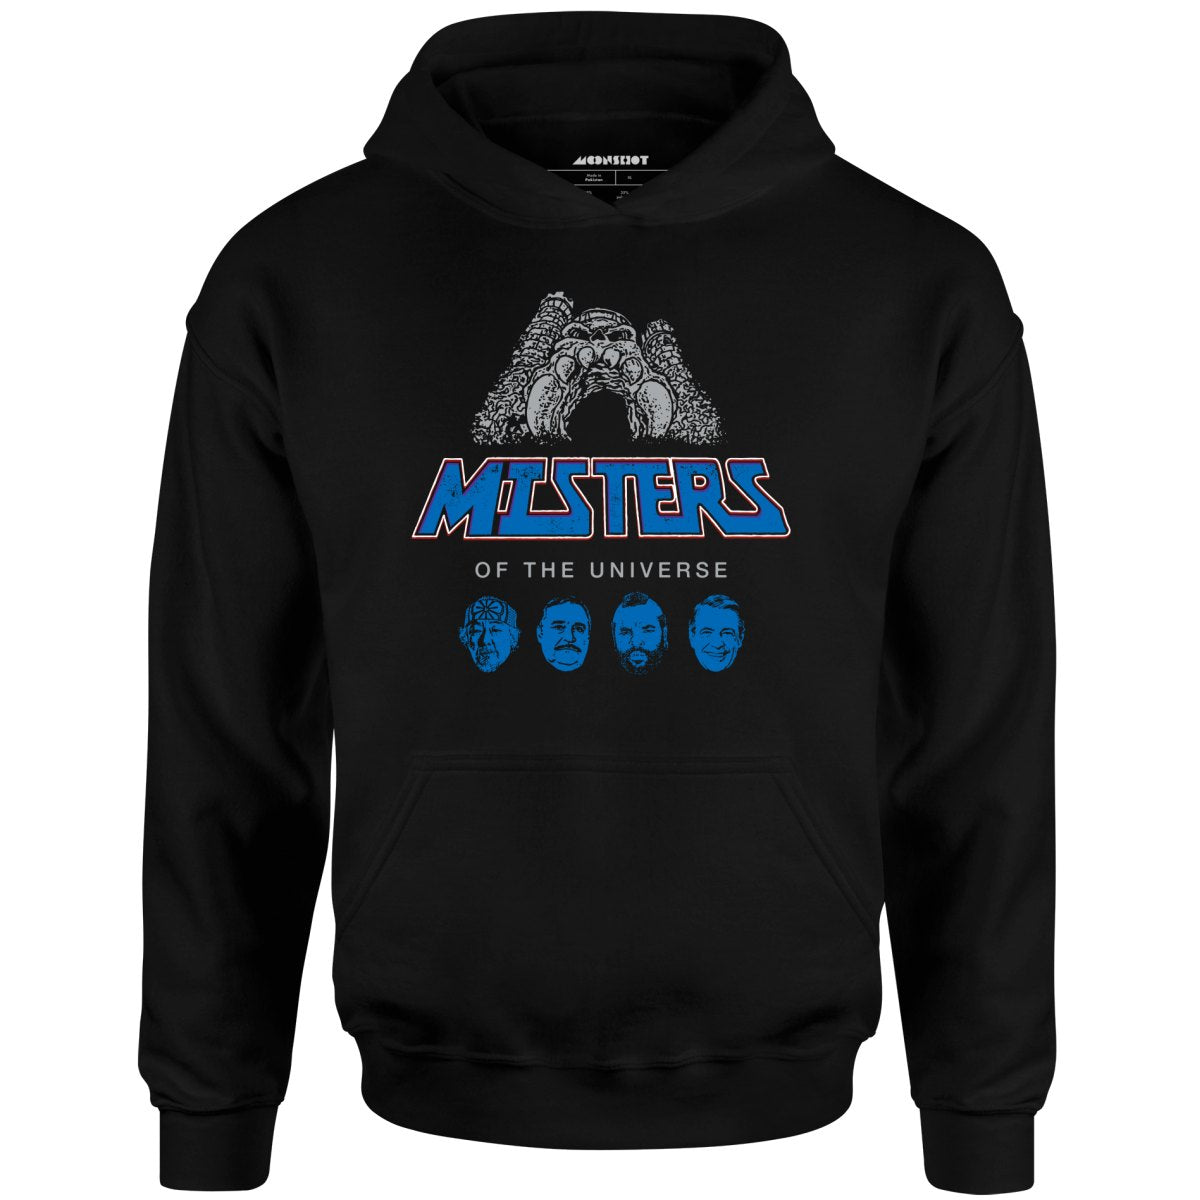 Misters of The Universe - Unisex Hoodie